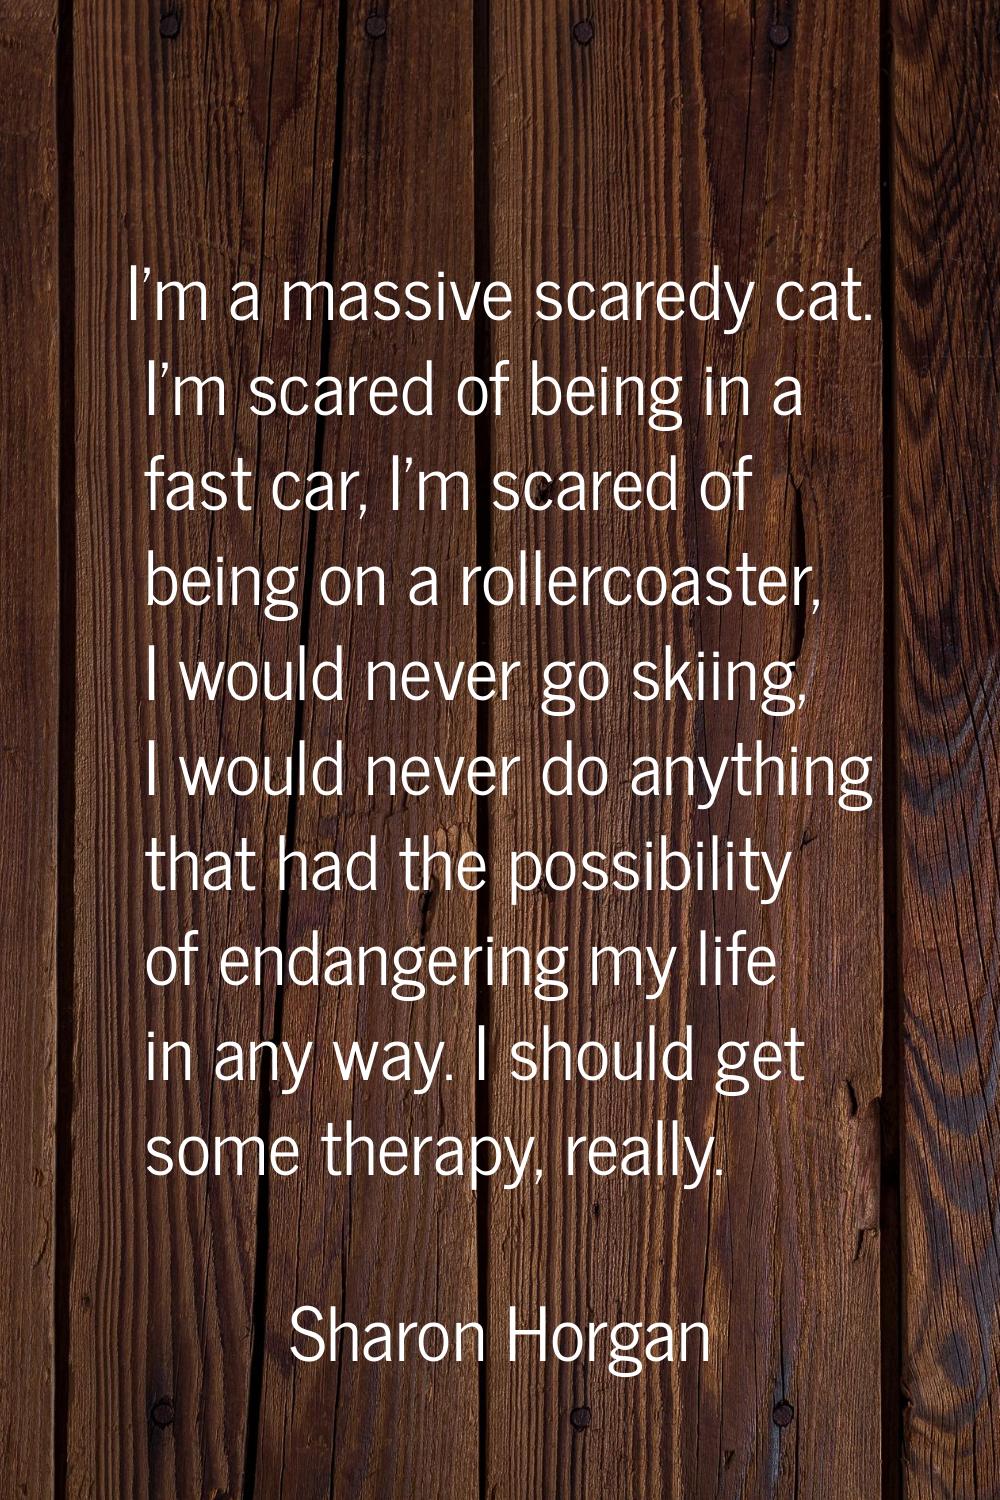 I'm a massive scaredy cat. I'm scared of being in a fast car, I'm scared of being on a rollercoaste